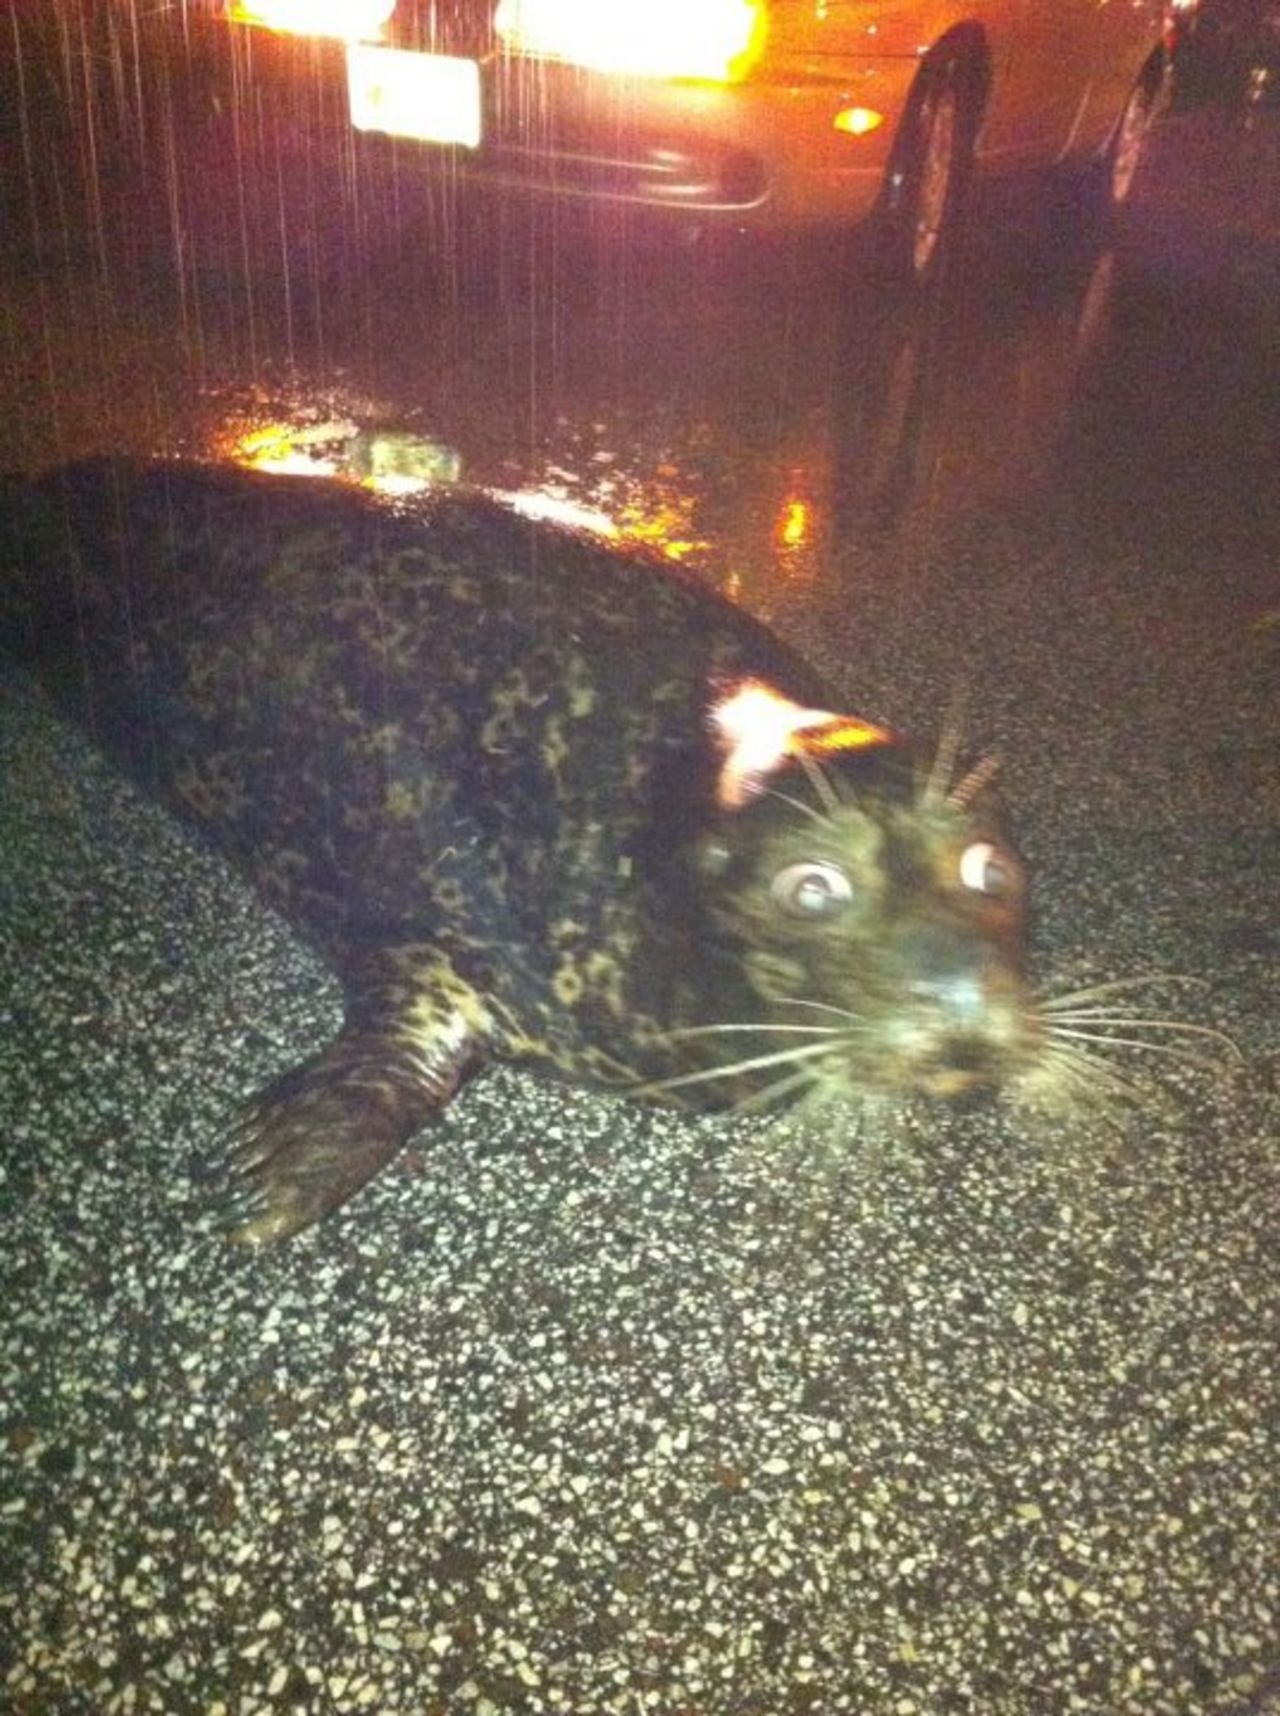 A stranded seal sat on a <a href="http://ireport.cnn.com/docs/DOC-806046">Duluth, Minnesota</a>, roadway after it was washed out of the Lake Superior Zoo during the June flooding. This image, shot by Ellie Burcar - who discovered the seal - went viral. Authorities soon arrived and the seal survived the ordeal.